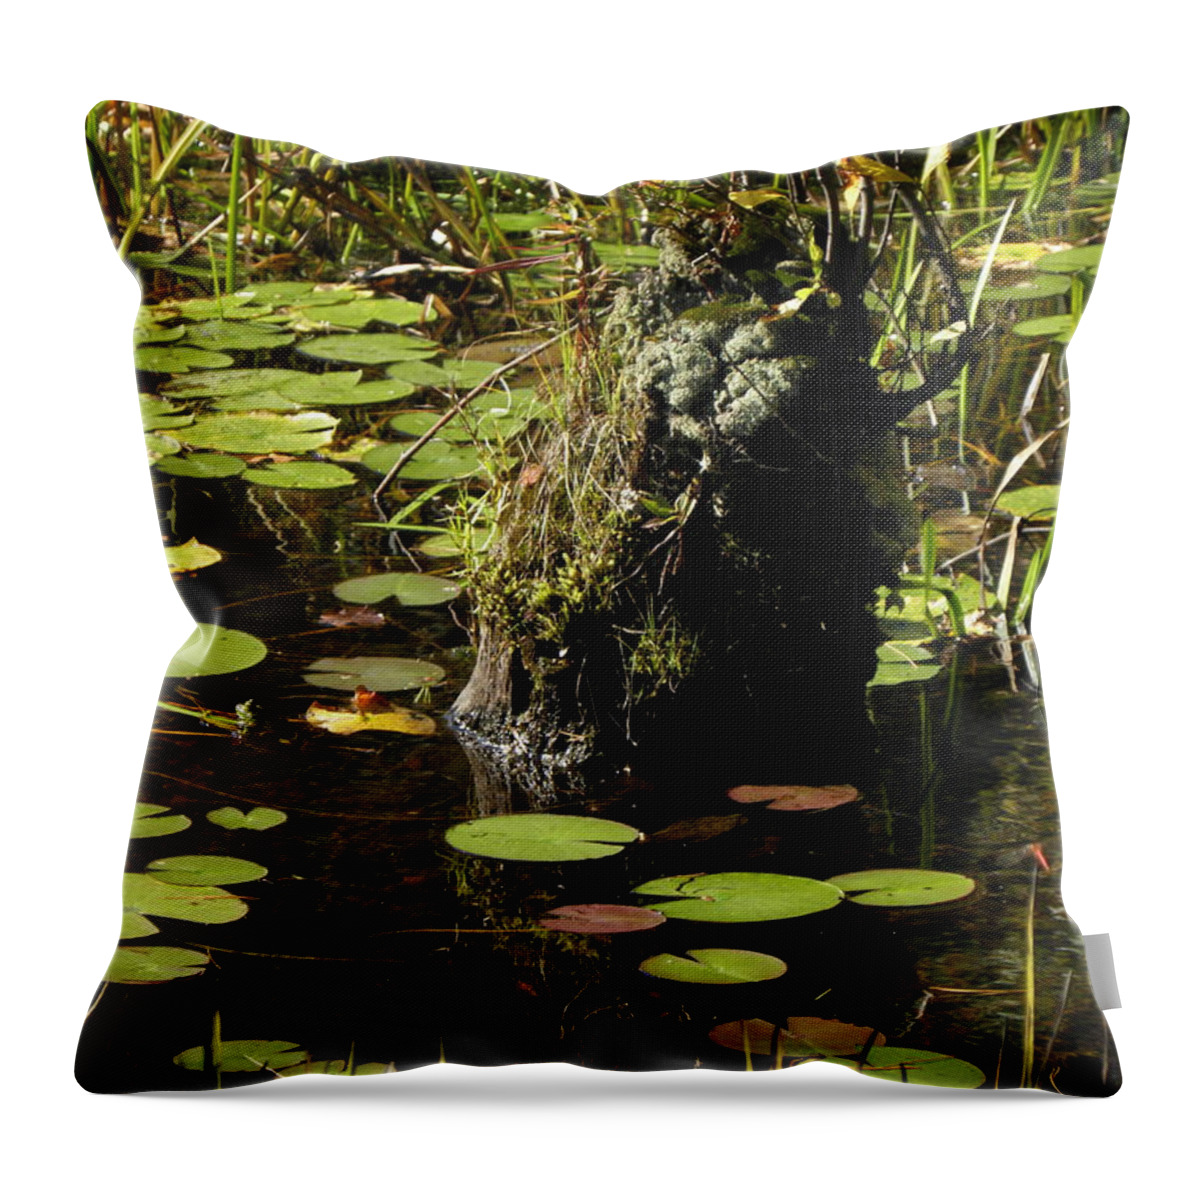 Stump Throw Pillow featuring the photograph Surrounded By Lily Pads by Kim Galluzzo